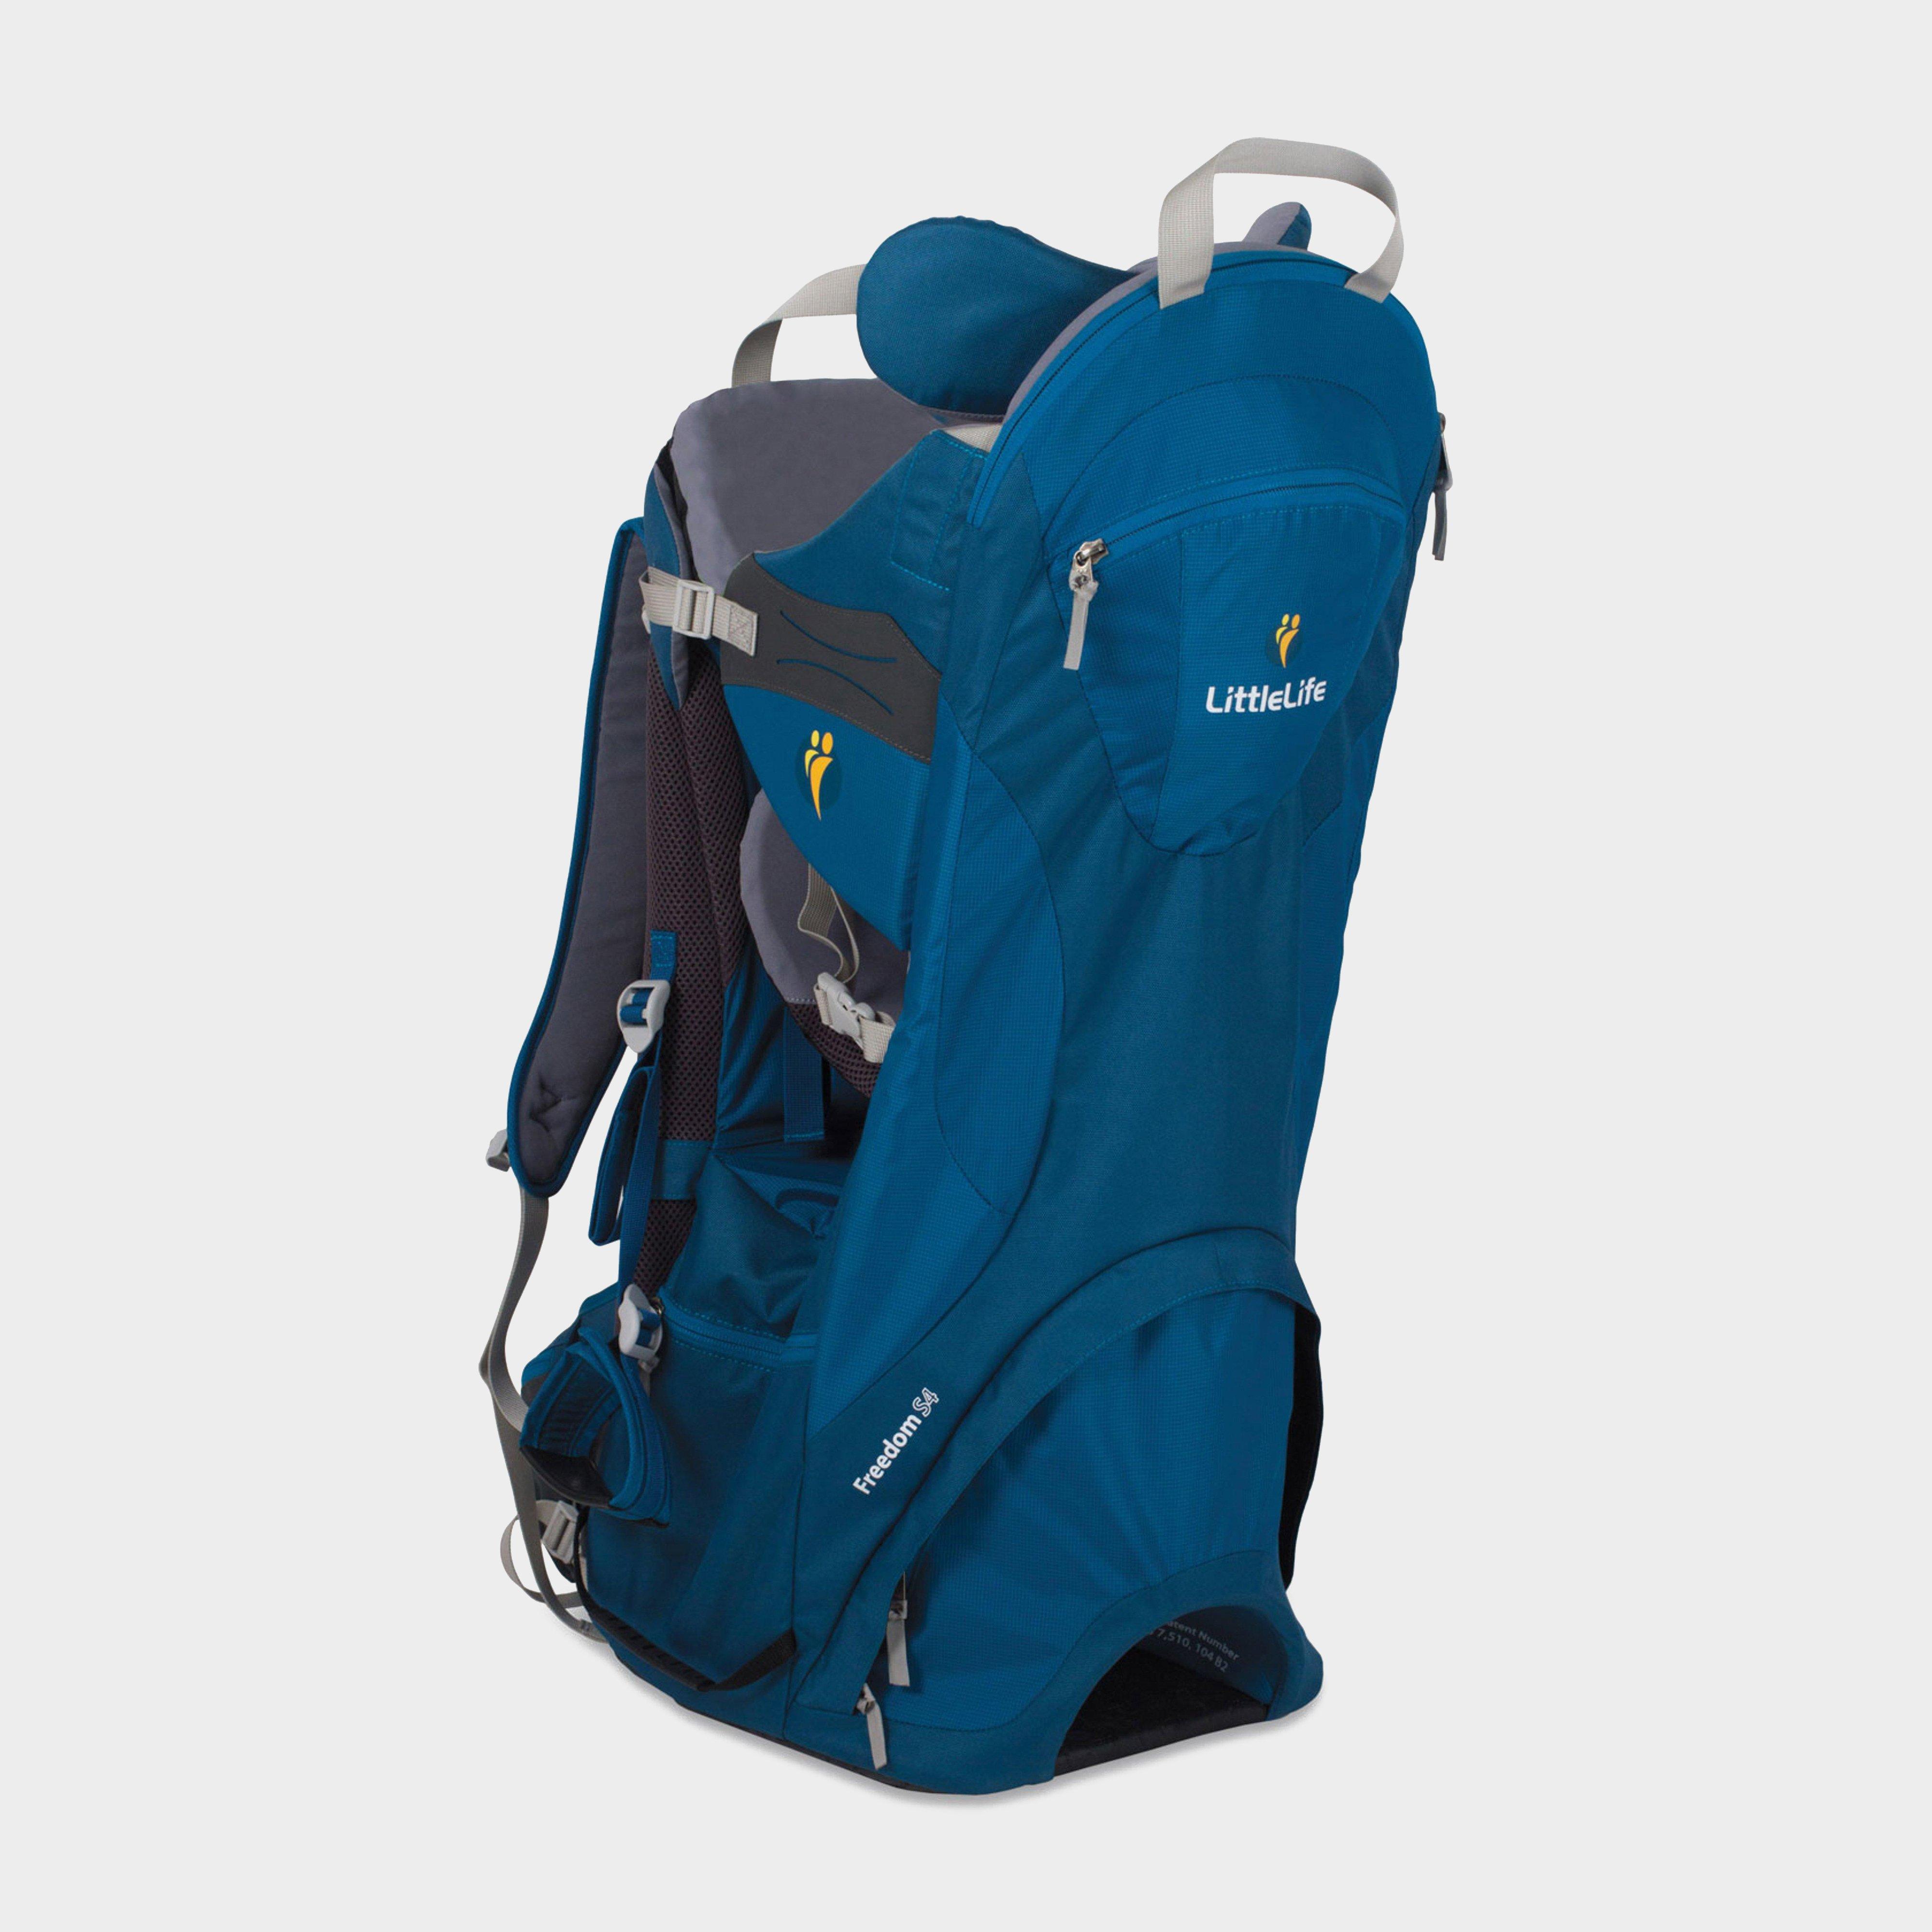 go outdoors child carrier